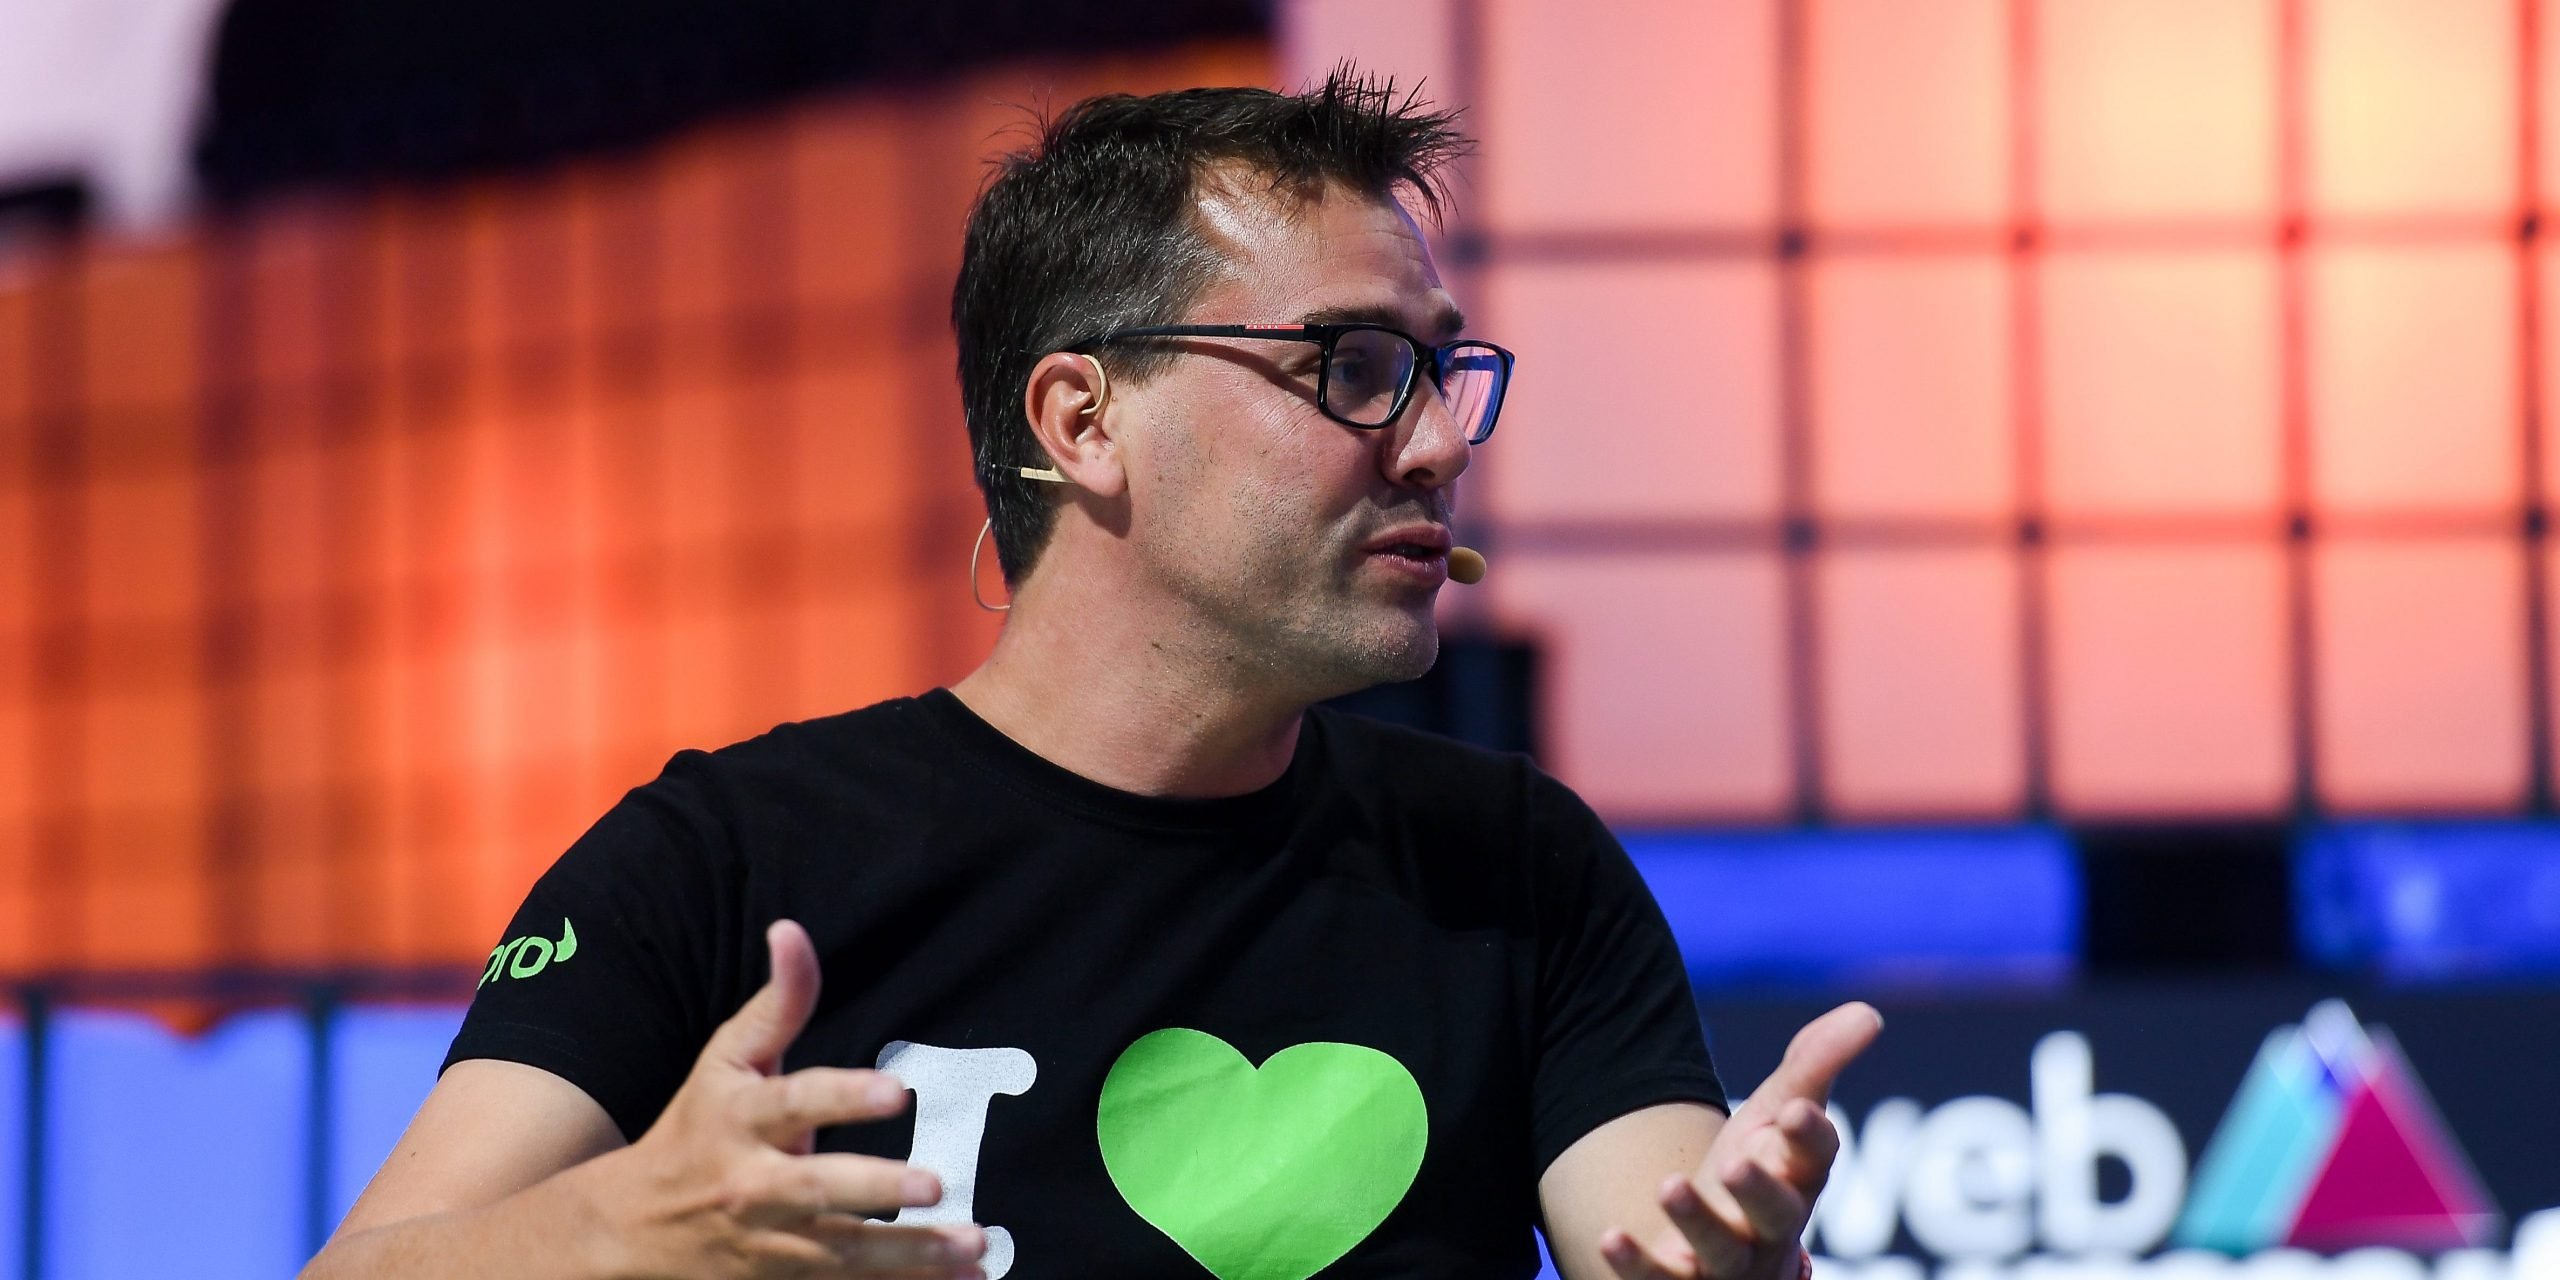 Yoni Assia, cofounder & CEO of eToro, on Centre Stage during the final day of Web Summit 2019 at the Altice Arena in Lisbon, Portugal.